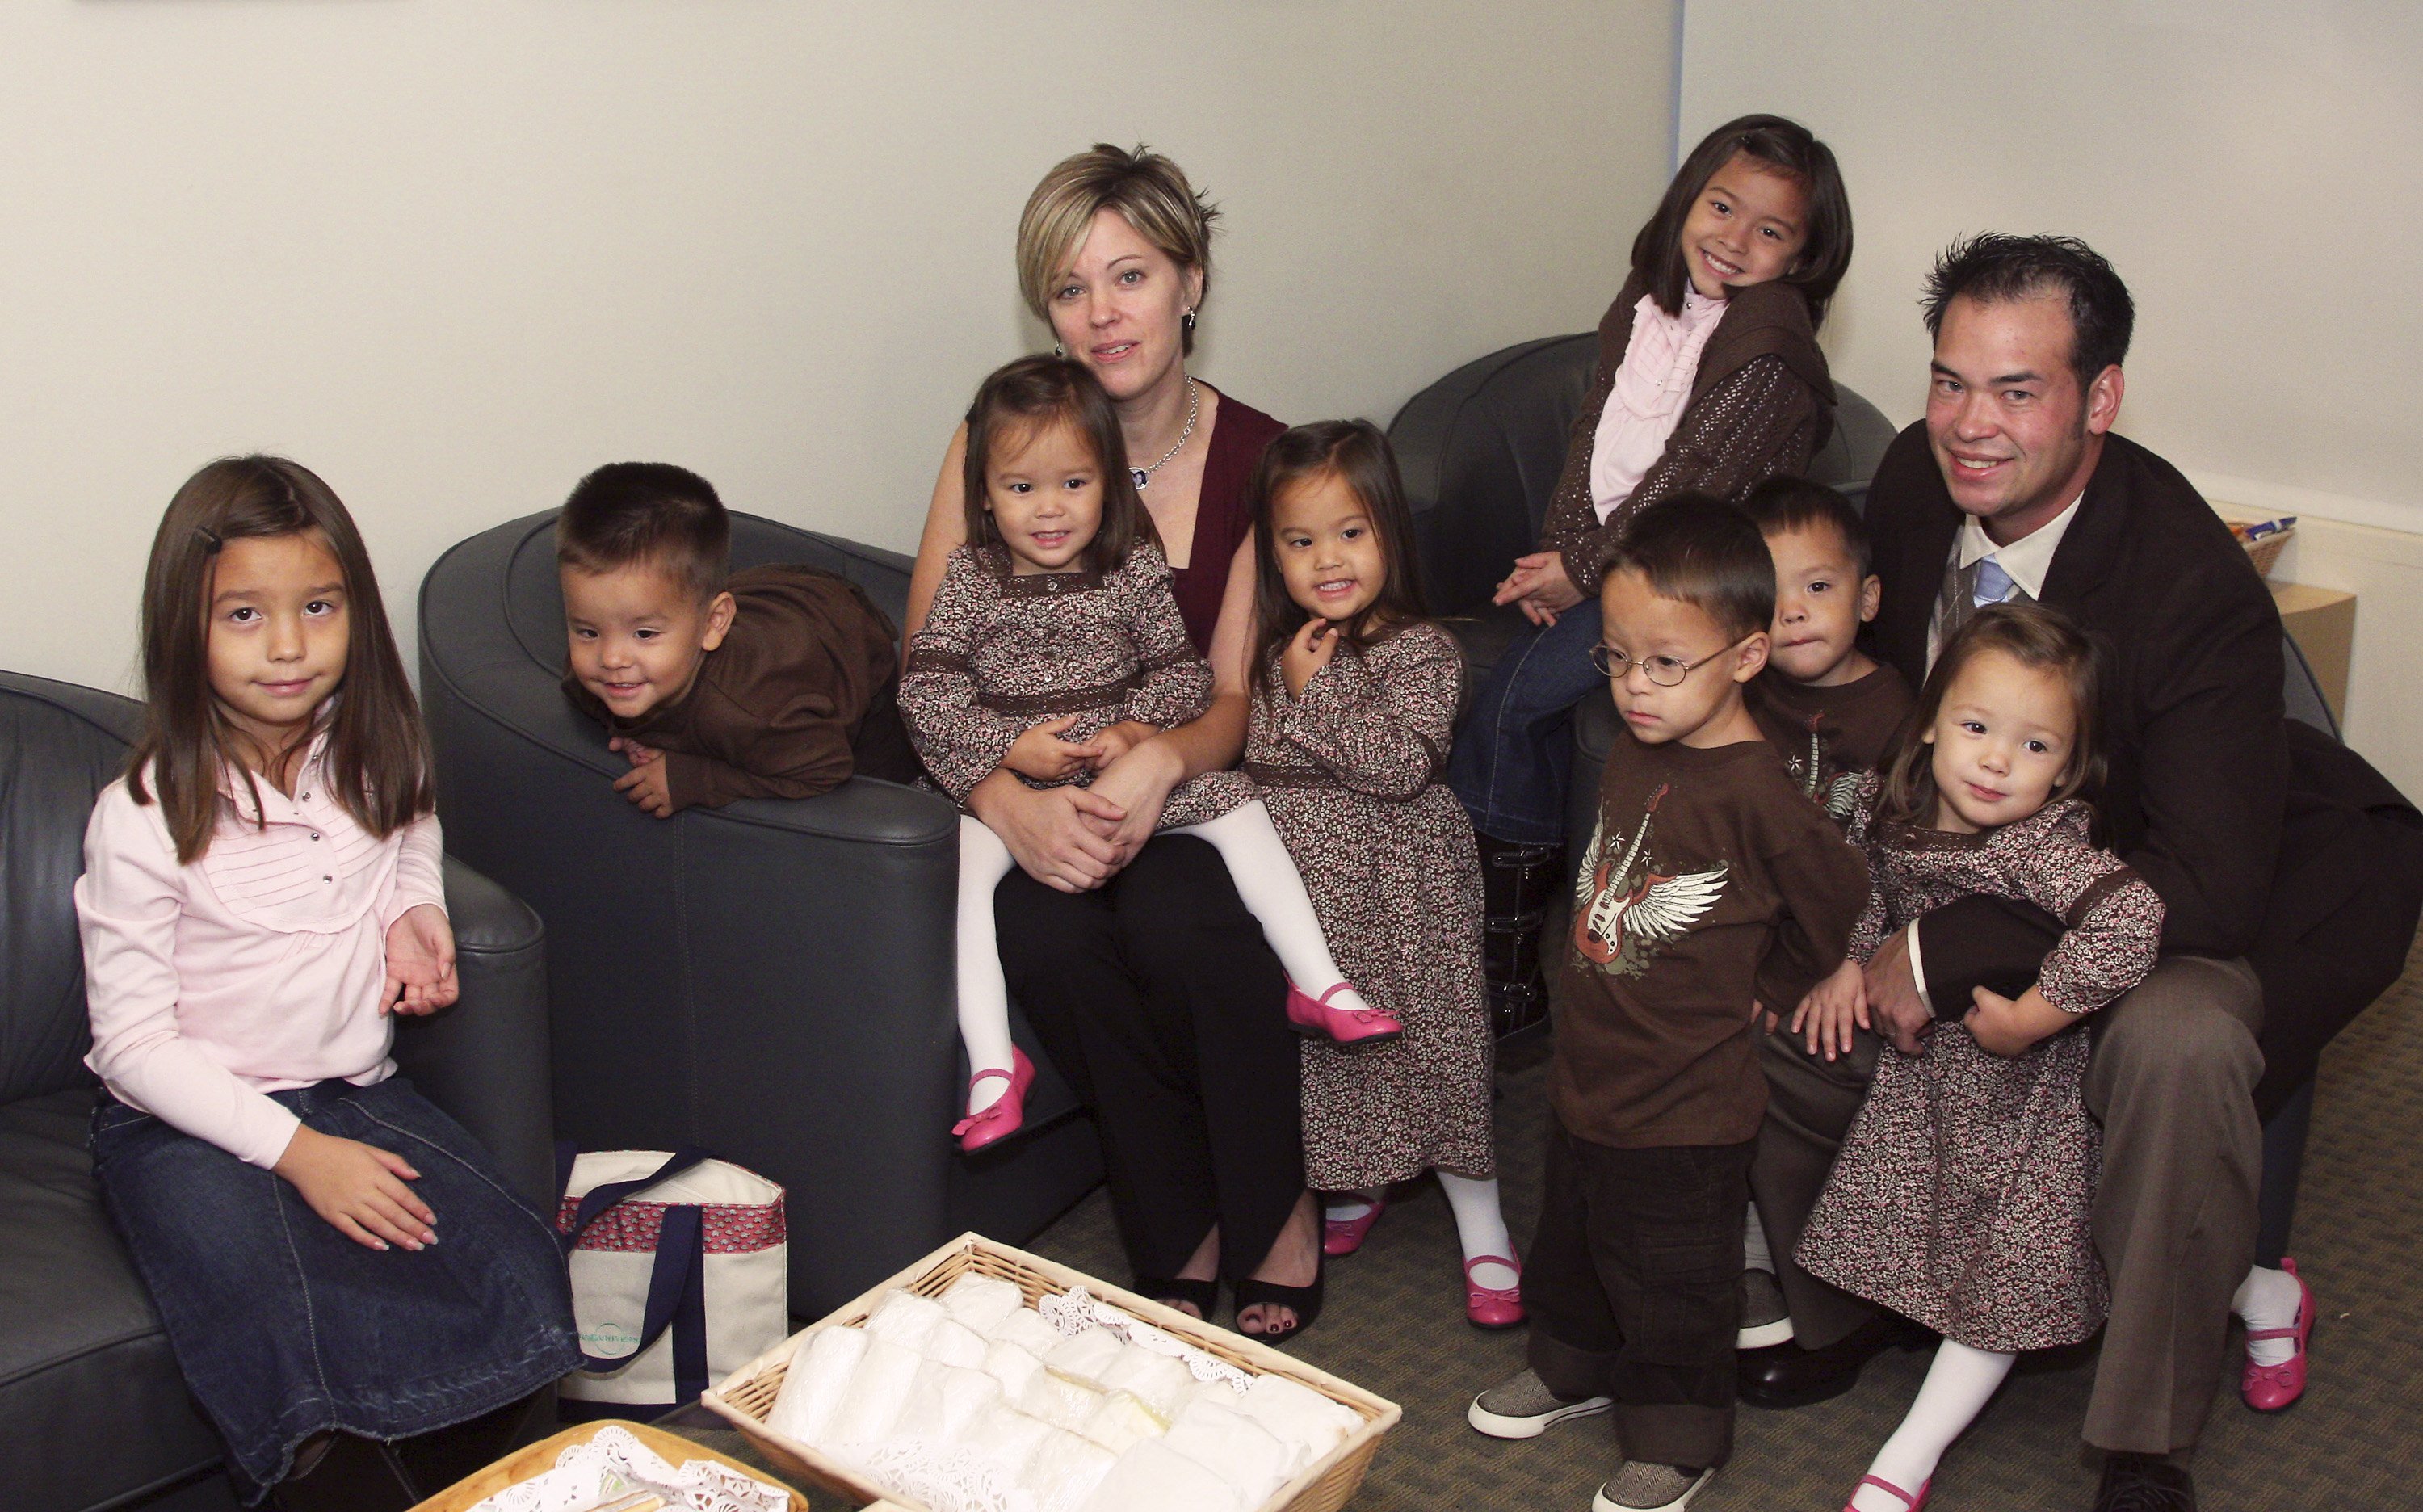 Kate and Jon Gosselin with their children at NBC news in 2007. | Source: Getty Images